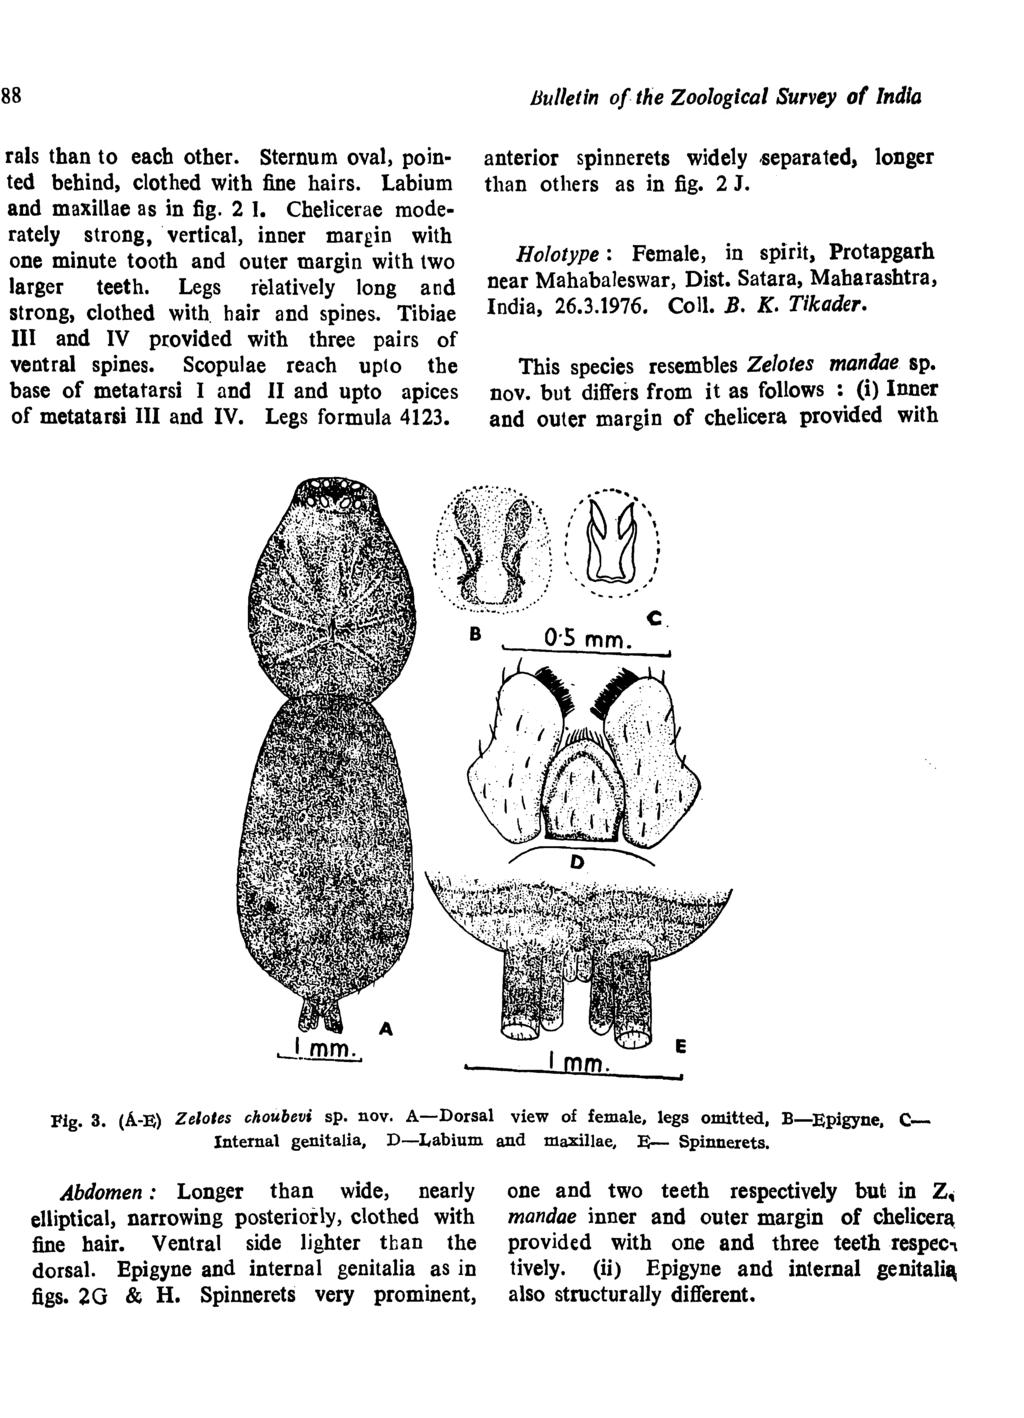 88 rals than to each other. Sternum oval, pointed behind, clothed with fine hairs. Labium and maxillae as in fig. 2 I.